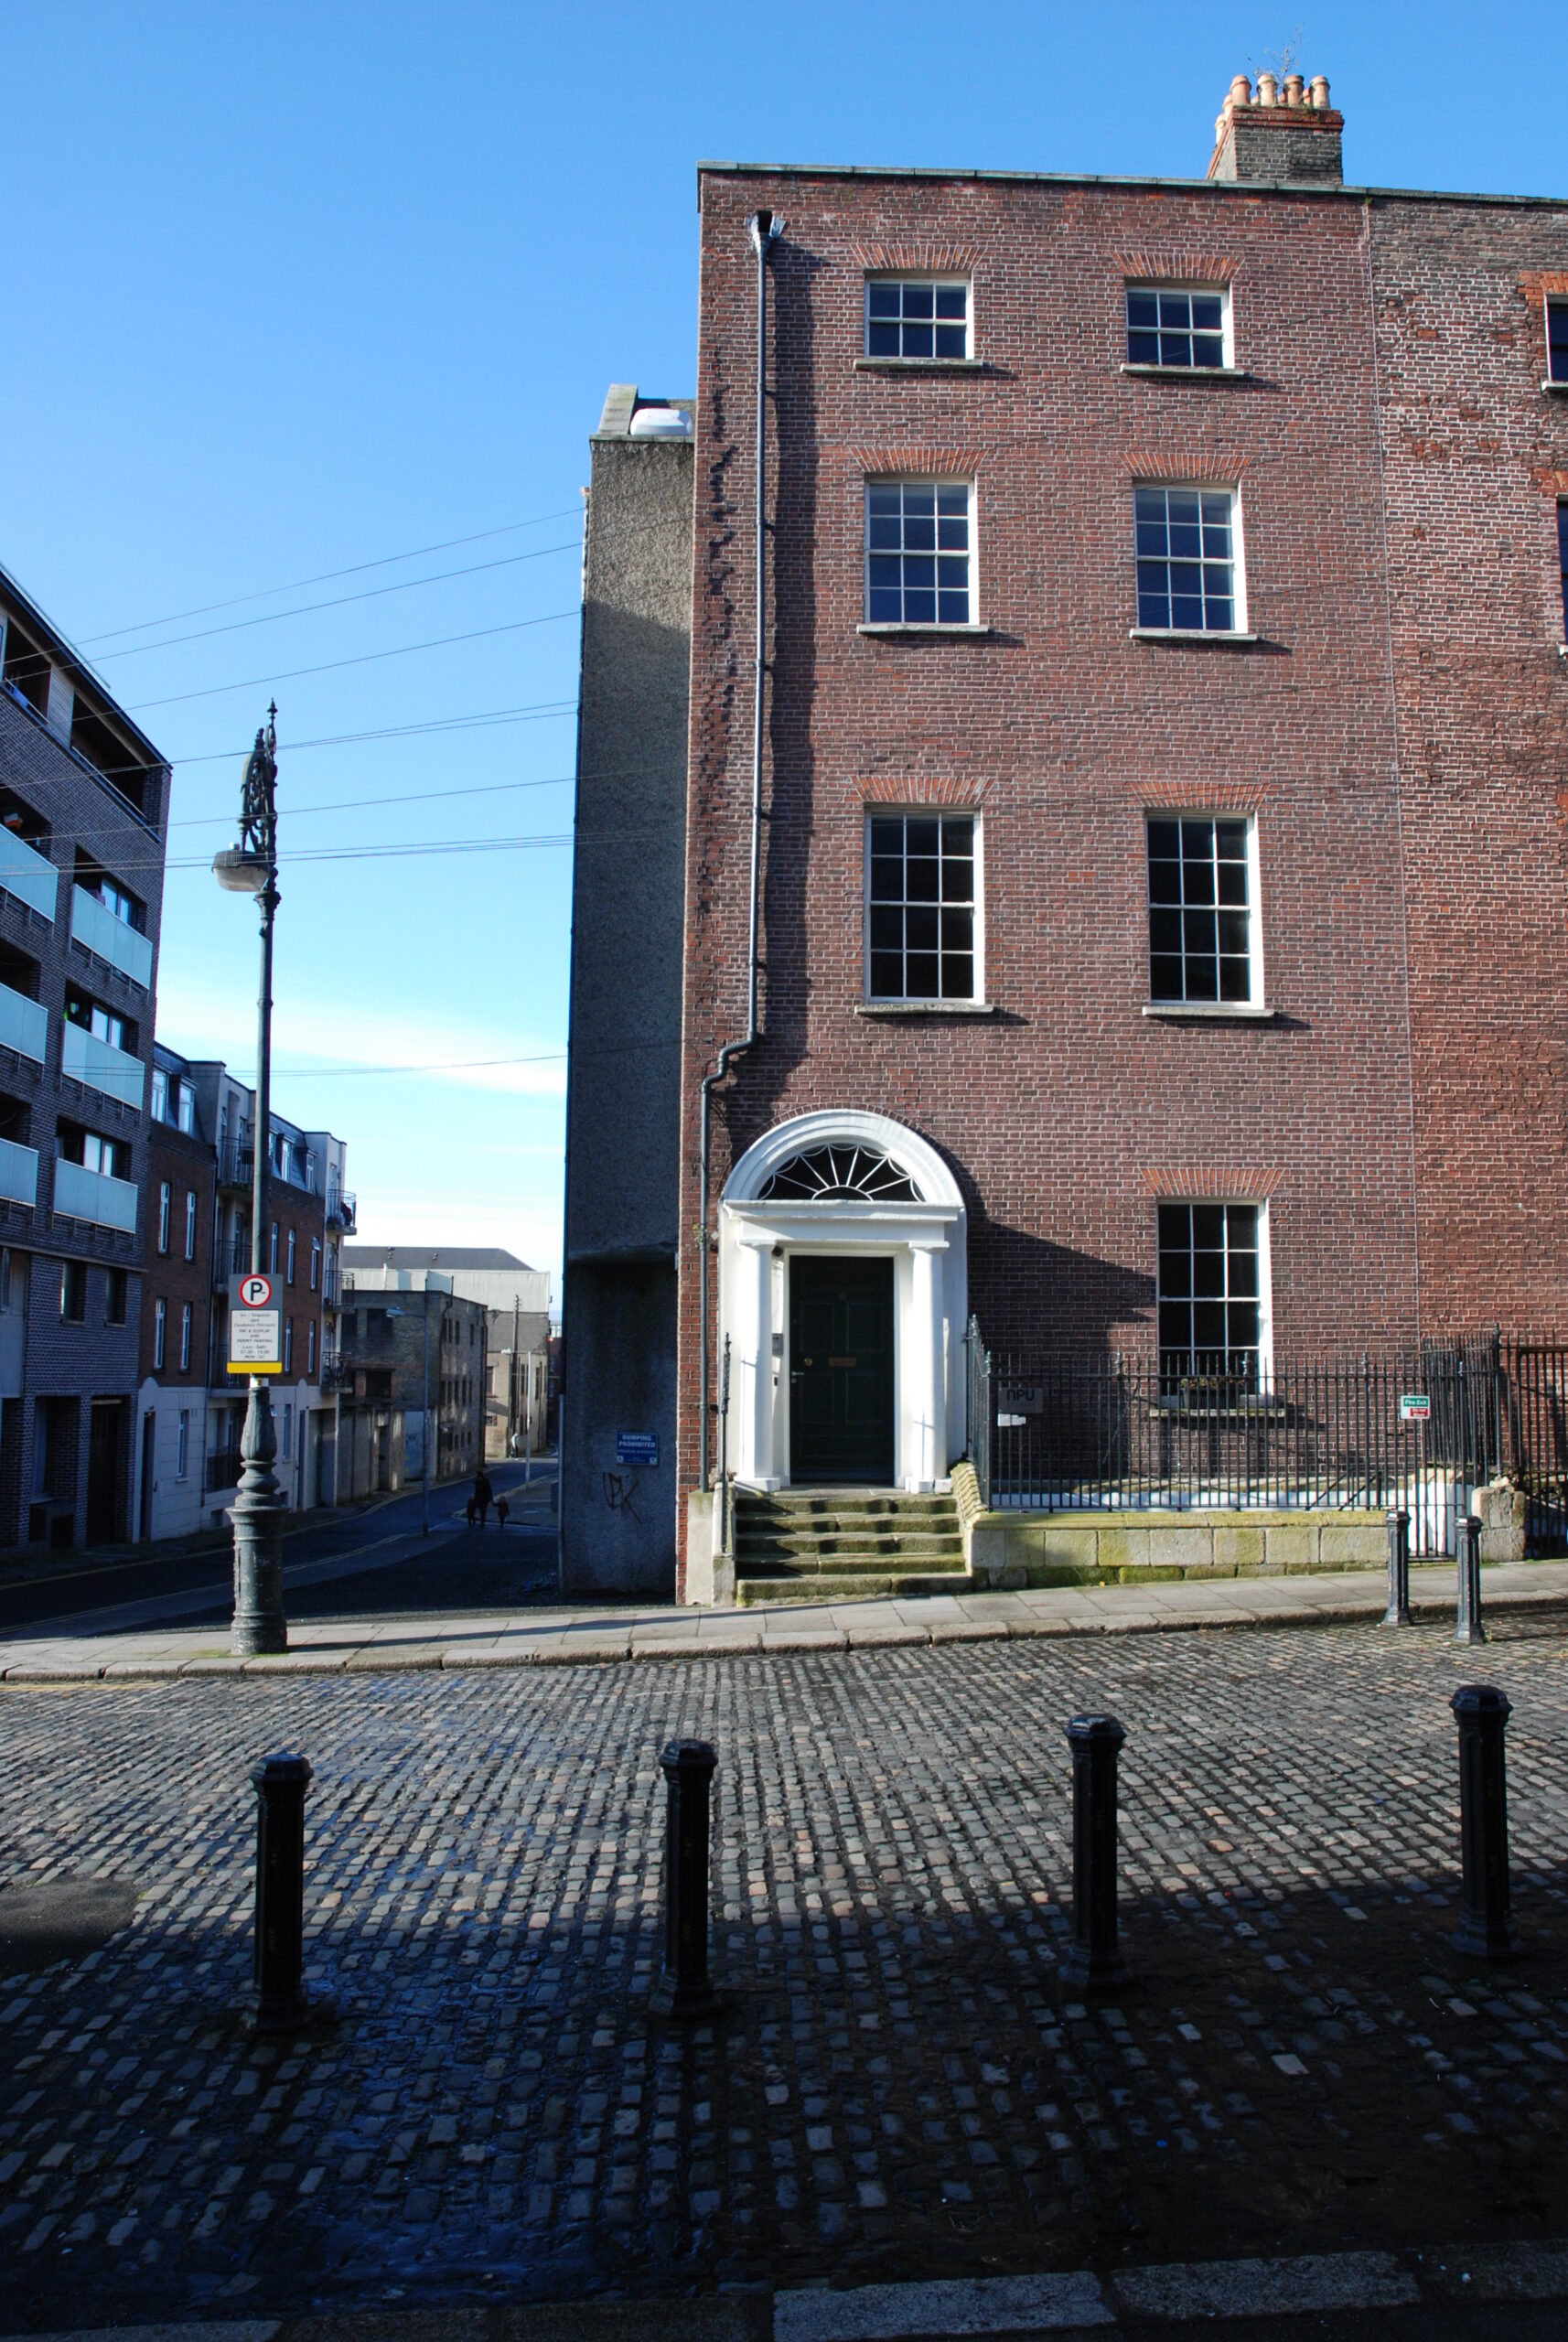 View across cobbled street to a four storey red-brick building with granite steps to front door, and a side-street to the left-hand side.